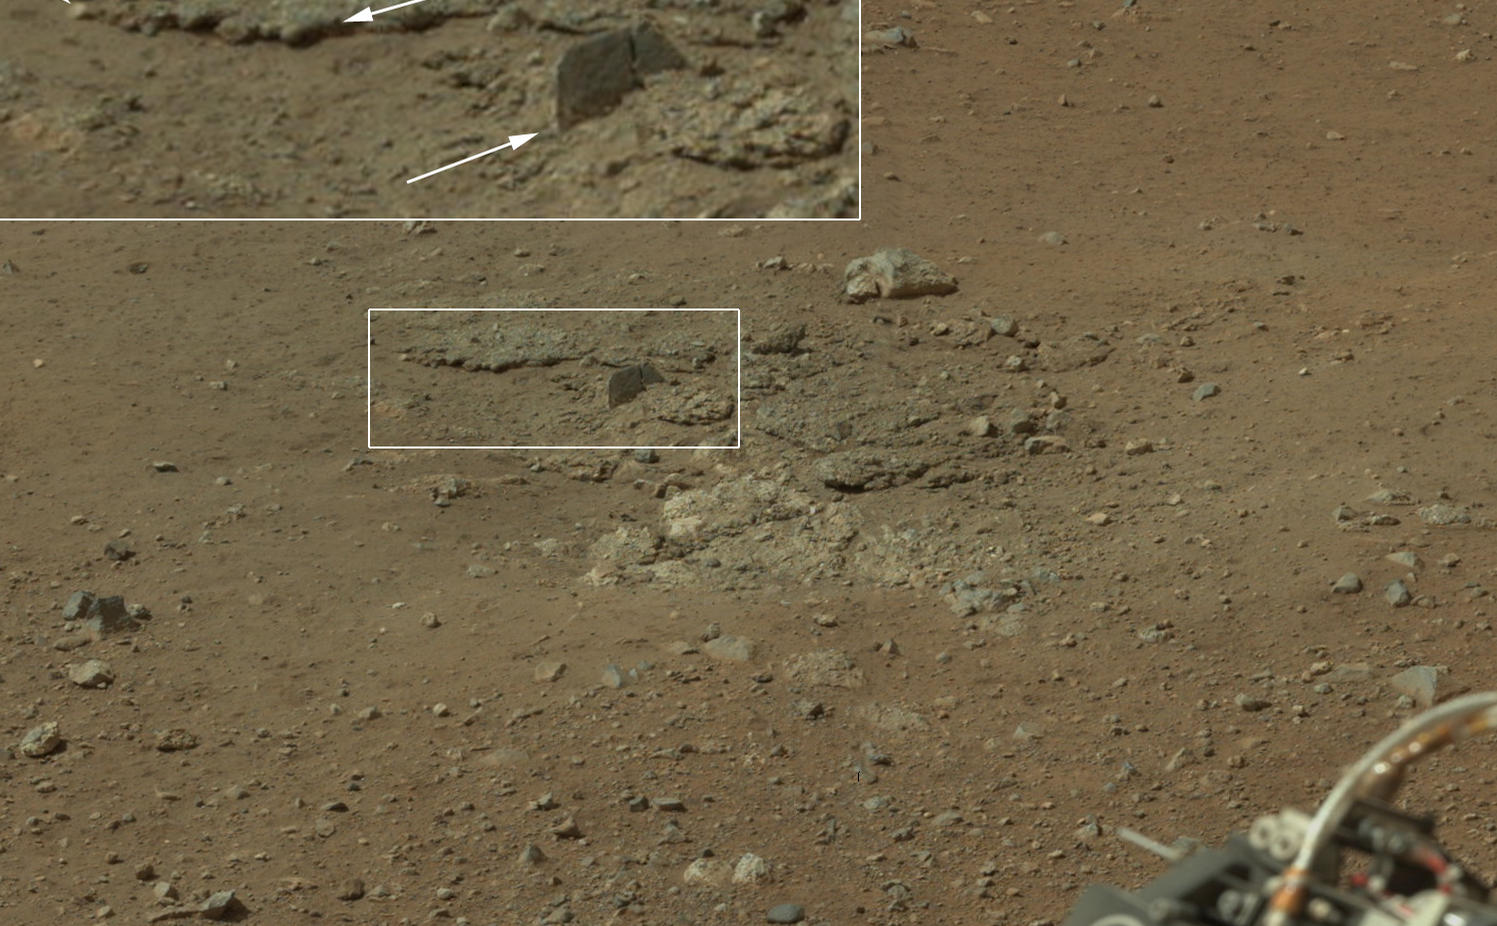 This color image from NASA's Curiosity rover shows an area excavated by the blast of the Mars Science Laboratory's descent stage rocket engines